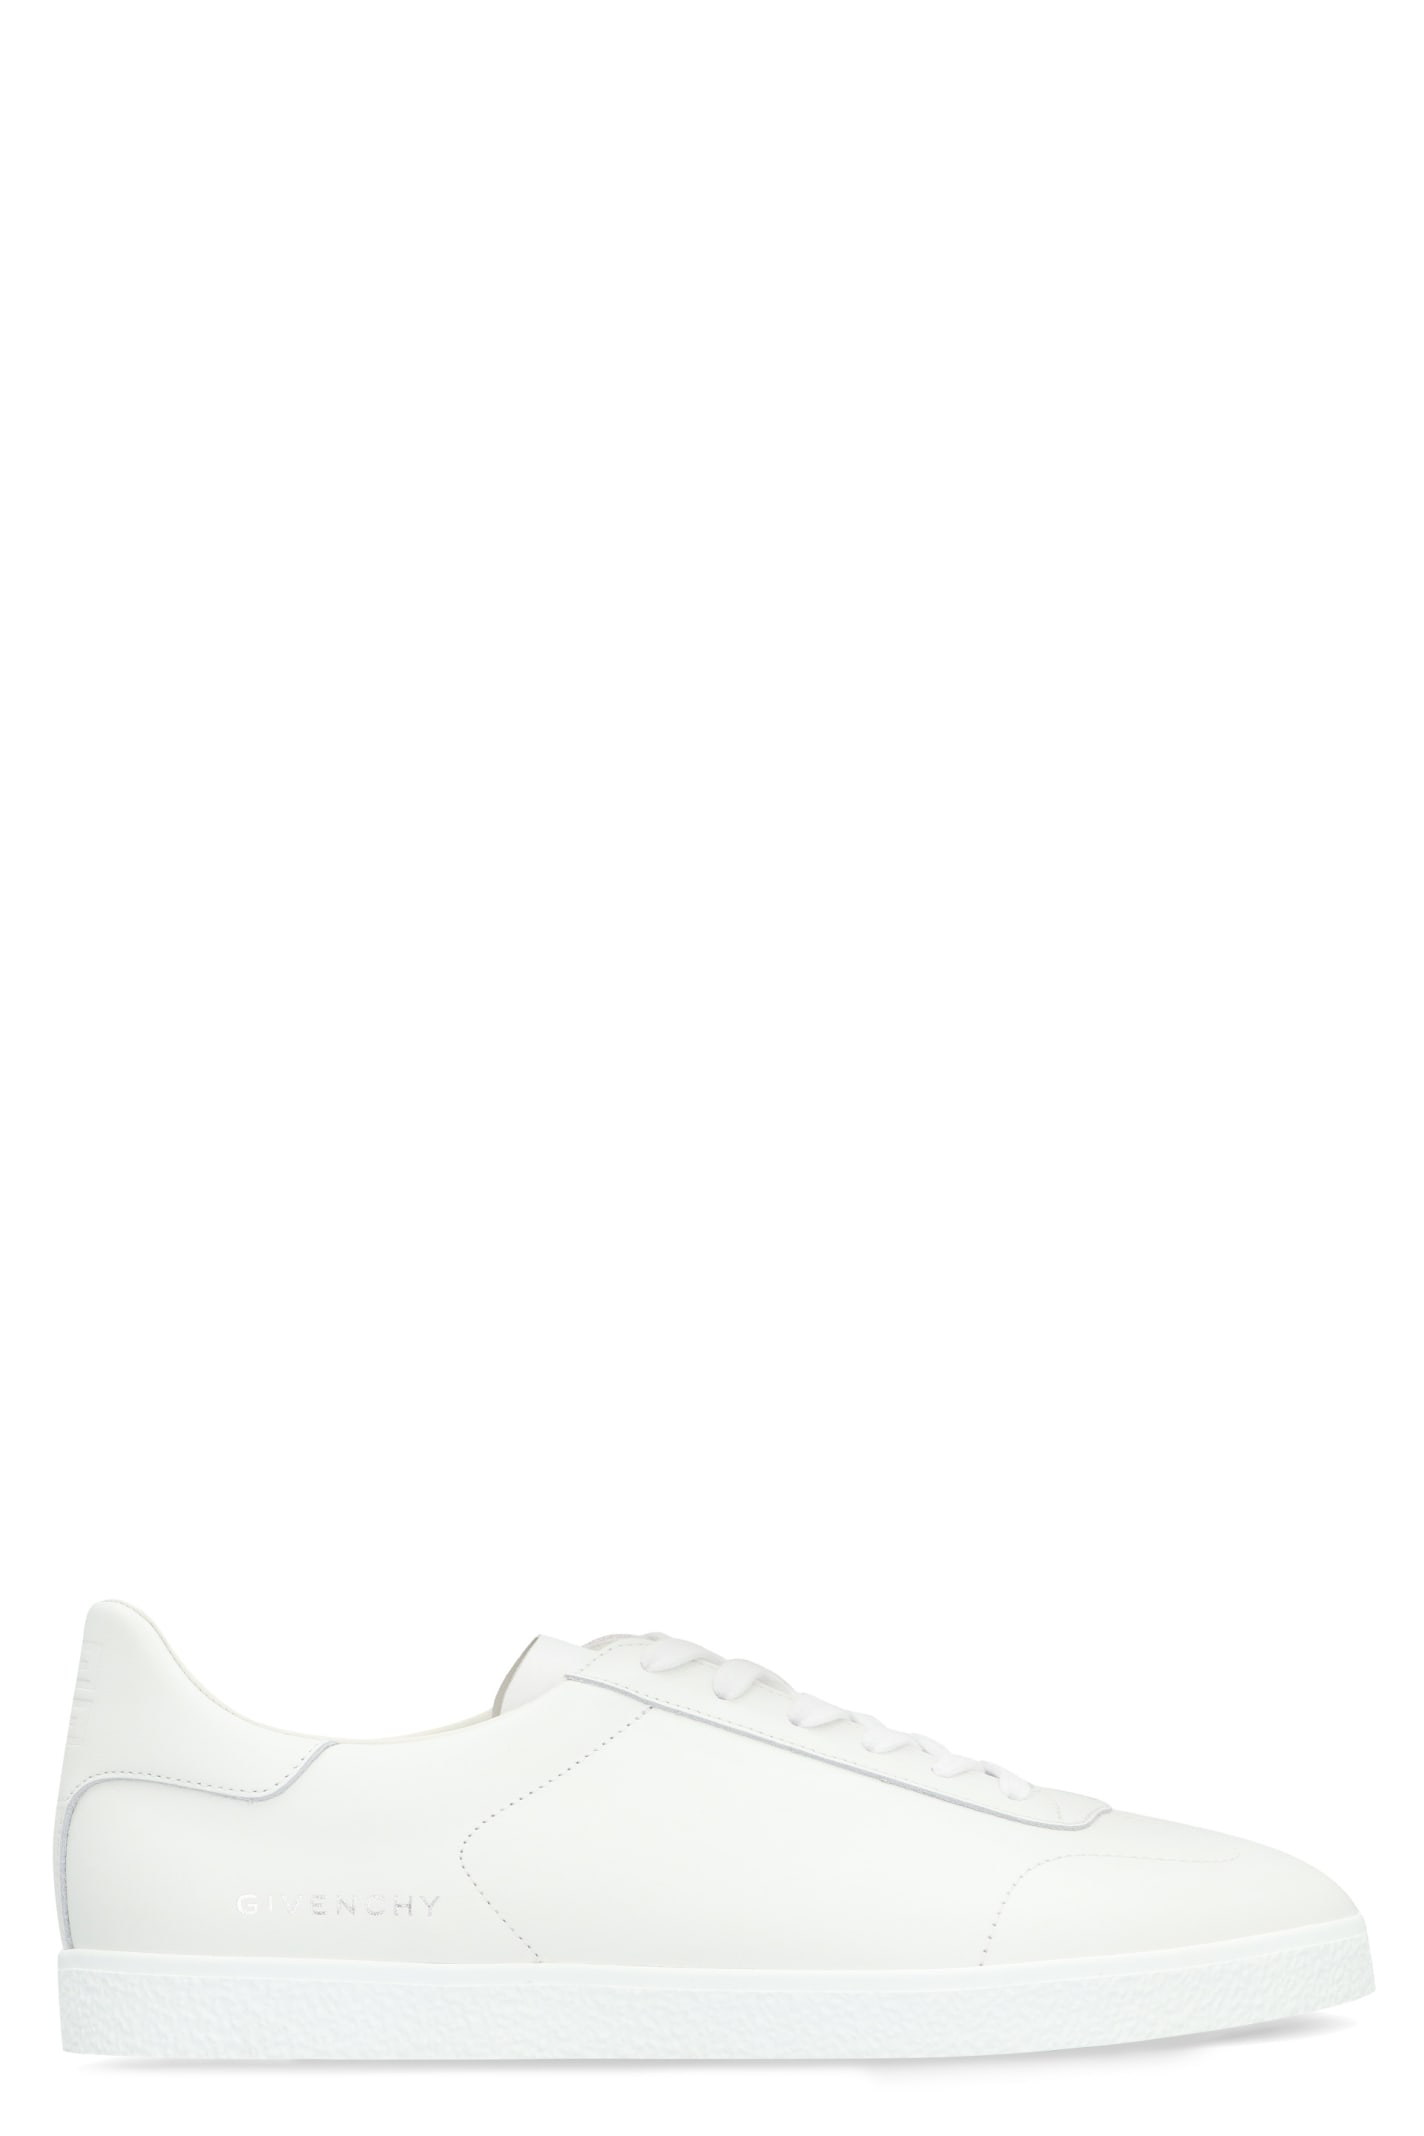 Givenchy Town Leather Low-top Sneakers In White